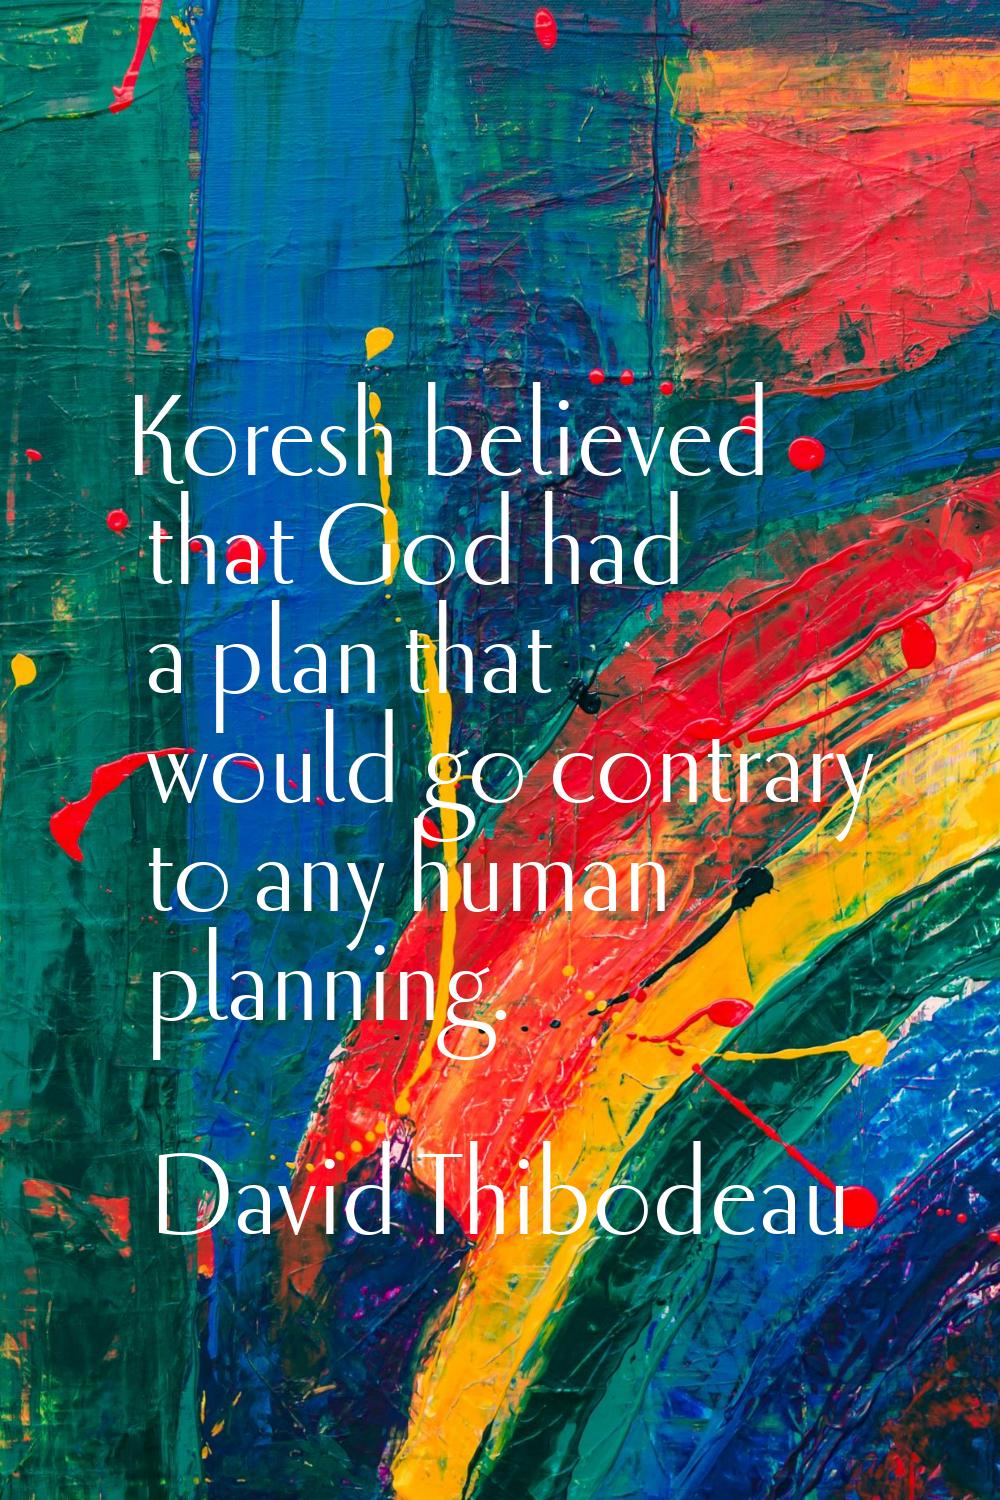 Koresh believed that God had a plan that would go contrary to any human planning.